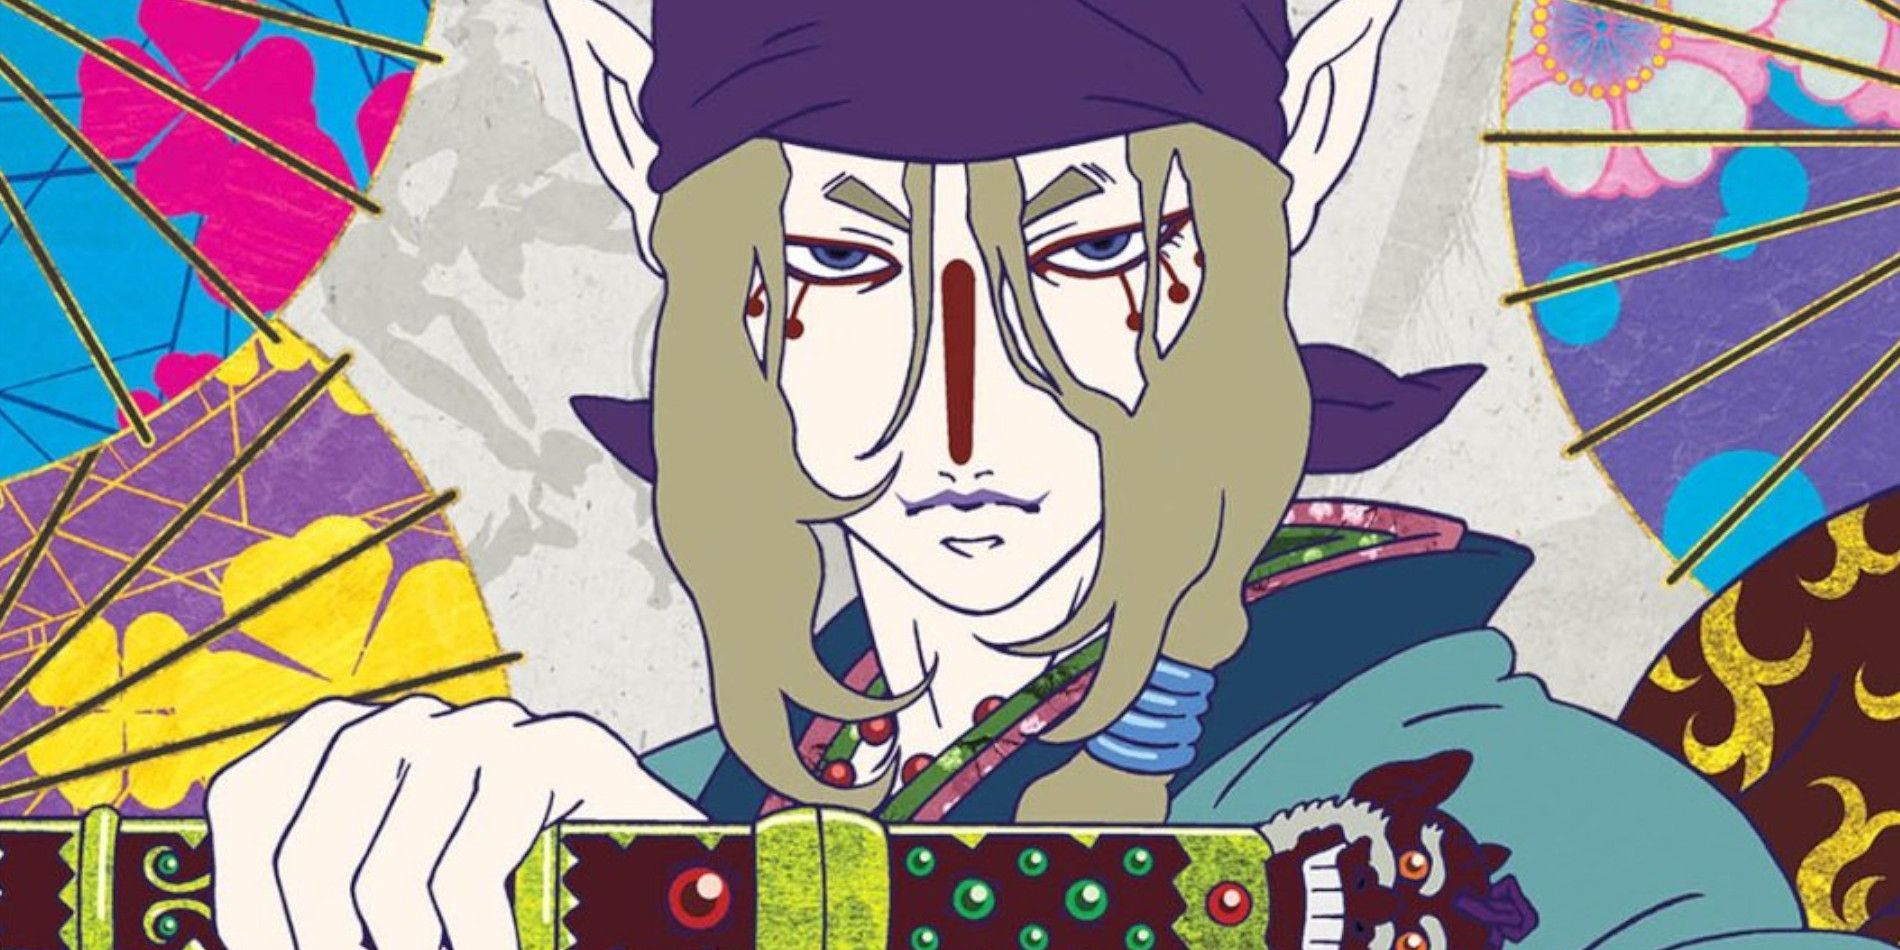 The medicine seller from the anime Monoke – an anime in a pattern-heavy style